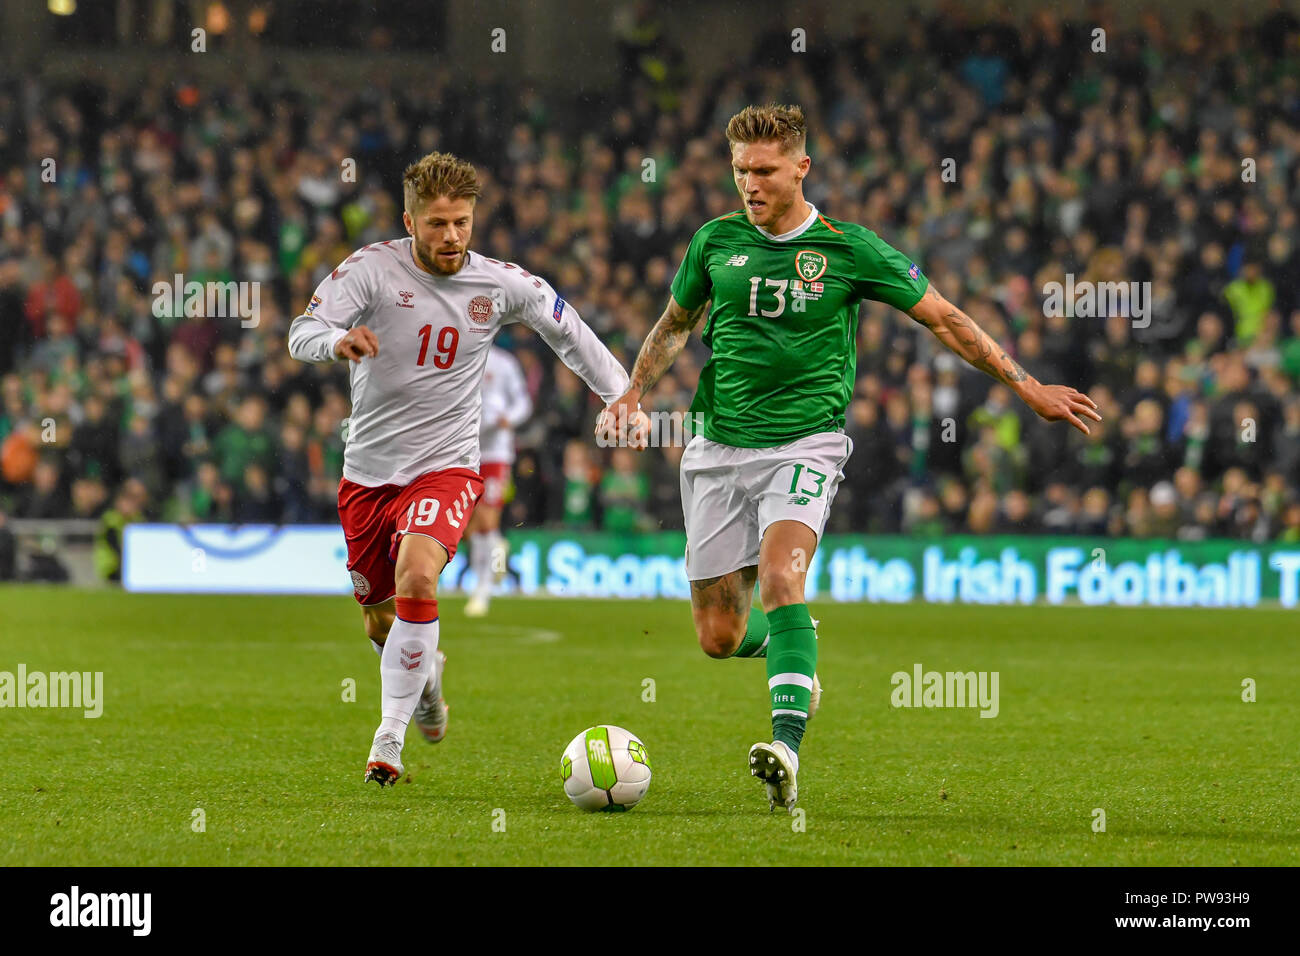 Lasse Schone and Jeff Hendrick in action during the Rep of Ireland vs Denmark UEFA Nations League match at the Aviva Stadium. Score 0-0 Stock Photo